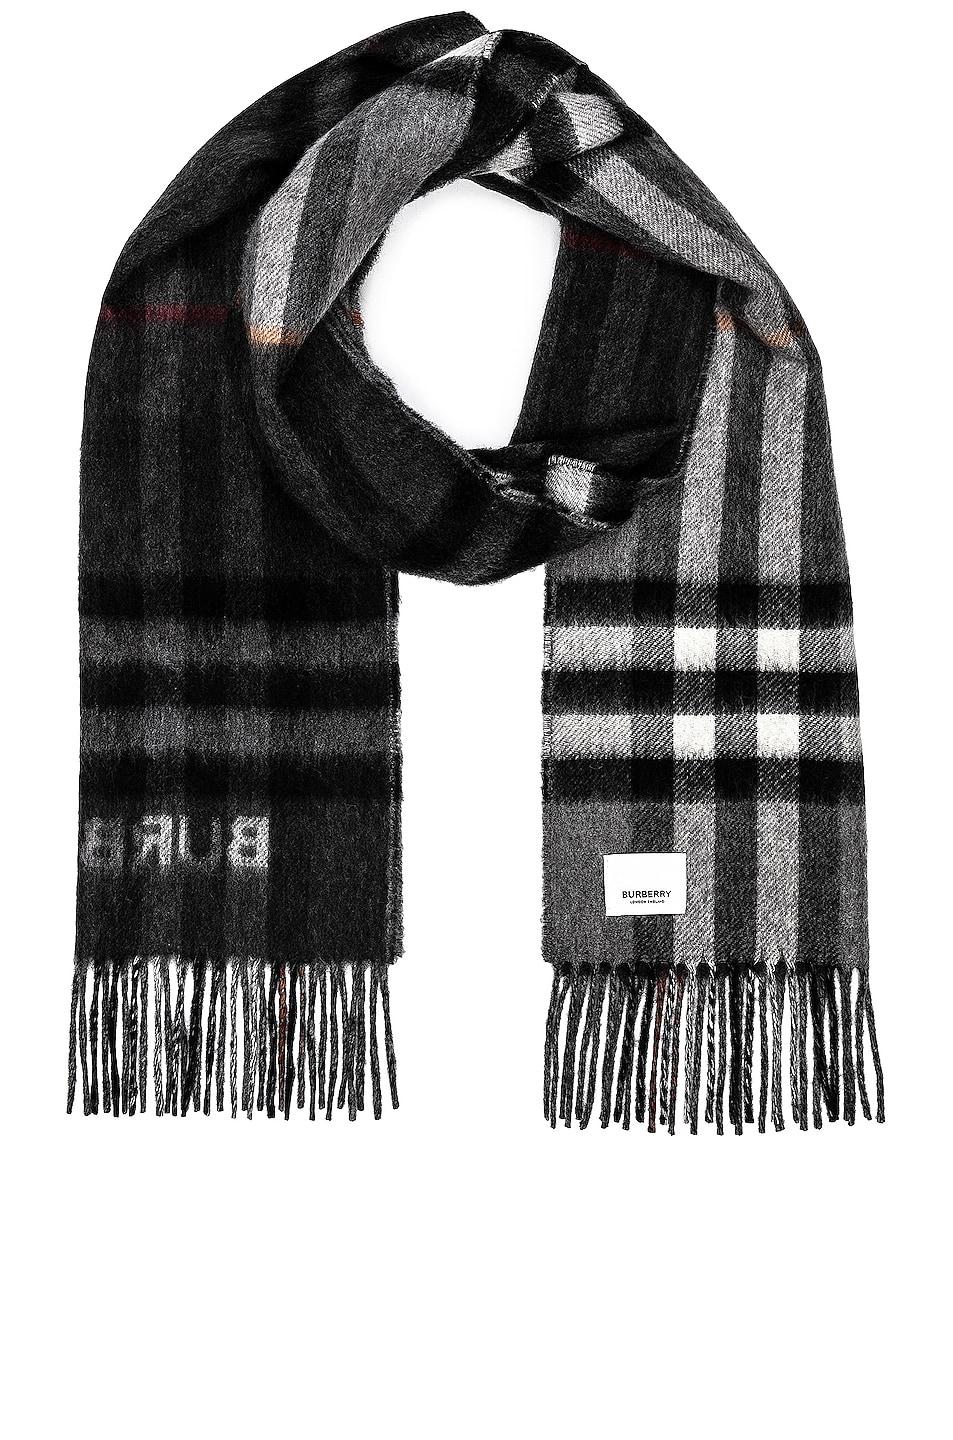 Burberry Giant Check Lateral Split Scarf in Black | Lyst UK